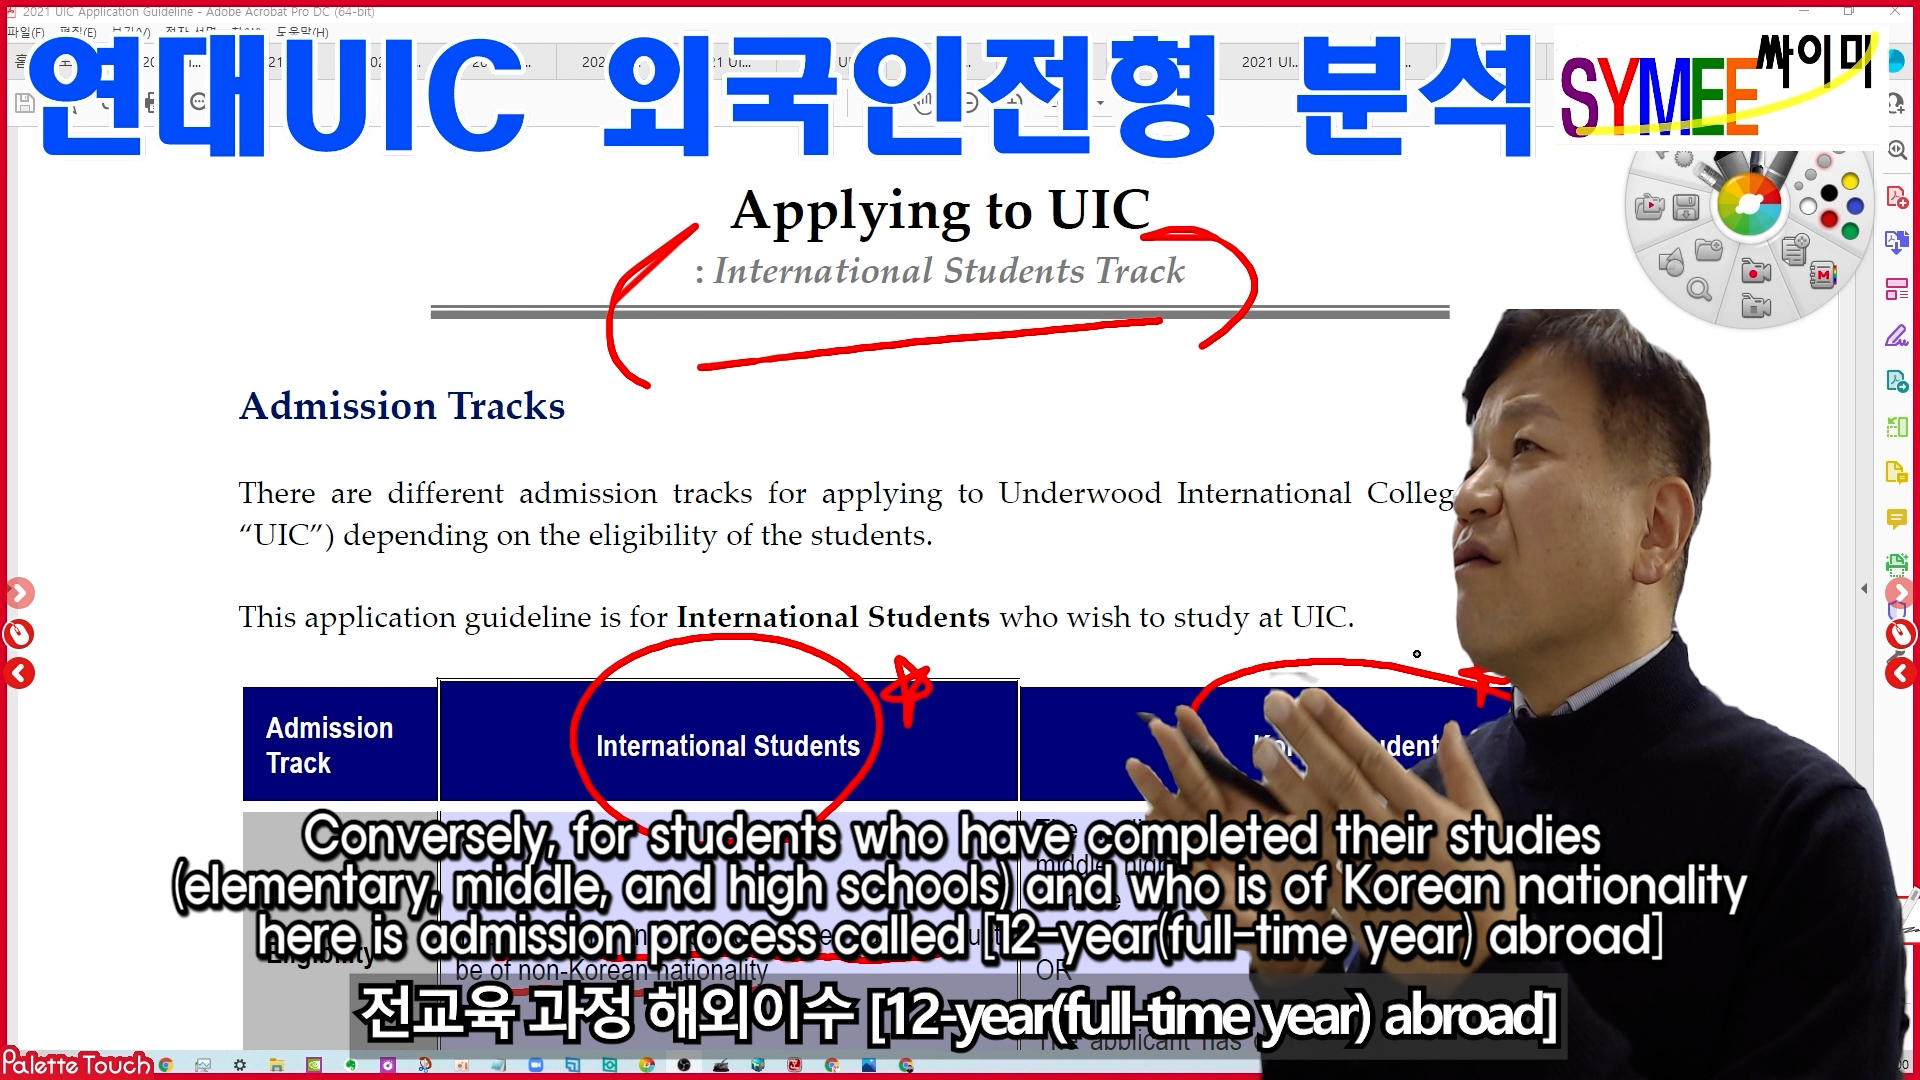 Yonsei Univ. Admission for UIC for Foreign Student 02 Qualifications.00_01_38_19.스틸 004.jpg